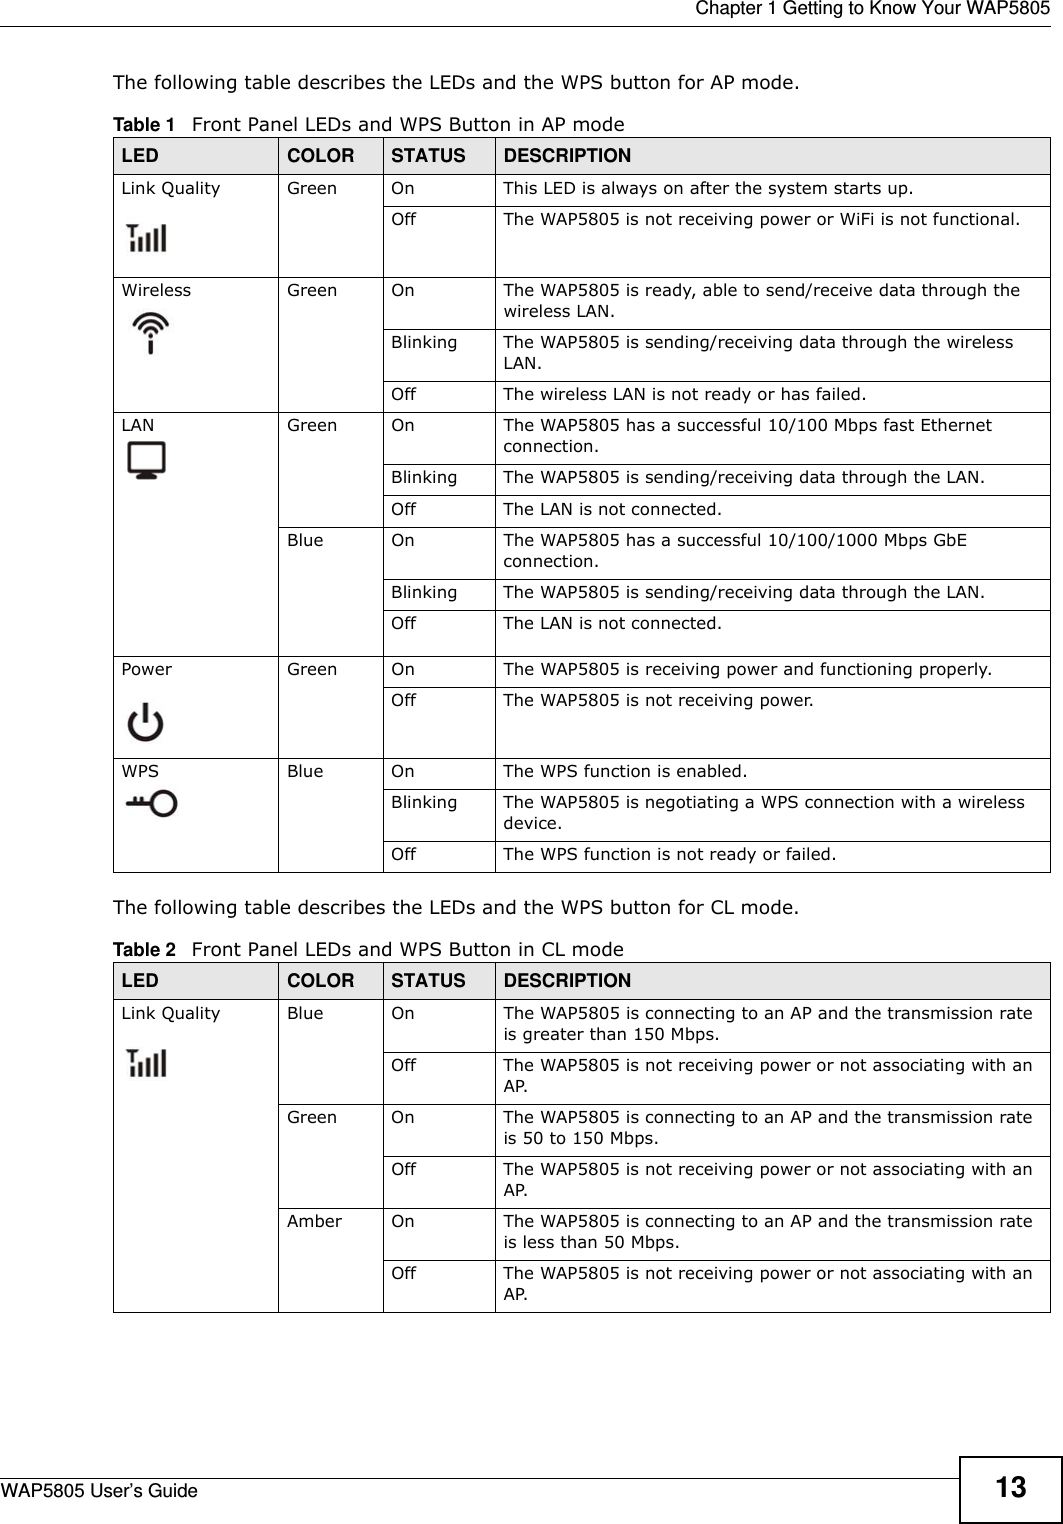  Chapter 1 Getting to Know Your WAP5805WAP5805 User’s Guide 13The following table describes the LEDs and the WPS button for AP mode.The following table describes the LEDs and the WPS button for CL mode.Table 1   Front Panel LEDs and WPS Button in AP modeLED COLOR STATUS DESCRIPTIONLink Quality Green On This LED is always on after the system starts up.Off The WAP5805 is not receiving power or WiFi is not functional.Wireless Green On The WAP5805 is ready, able to send/receive data through the wireless LAN. Blinking The WAP5805 is sending/receiving data through the wireless LAN.Off The wireless LAN is not ready or has failed.LAN  Green On The WAP5805 has a successful 10/100 Mbps fast Ethernet connection. Blinking The WAP5805 is sending/receiving data through the LAN.Off The LAN is not connected.Blue On The WAP5805 has a successful 10/100/1000 Mbps GbE connection. Blinking The WAP5805 is sending/receiving data through the LAN.Off The LAN is not connected.Power Green On The WAP5805 is receiving power and functioning properly. Off The WAP5805 is not receiving power.WPS Blue On The WPS function is enabled.Blinking The WAP5805 is negotiating a WPS connection with a wireless device.Off The WPS function is not ready or failed.Table 2   Front Panel LEDs and WPS Button in CL modeLED COLOR STATUS DESCRIPTIONLink Quality Blue On The WAP5805 is connecting to an AP and the transmission rate is greater than 150 Mbps.Off The WAP5805 is not receiving power or not associating with an AP.Green On The WAP5805 is connecting to an AP and the transmission rate is 50 to 150 Mbps.Off The WAP5805 is not receiving power or not associating with an AP.Amber On The WAP5805 is connecting to an AP and the transmission rate is less than 50 Mbps.Off The WAP5805 is not receiving power or not associating with an AP.